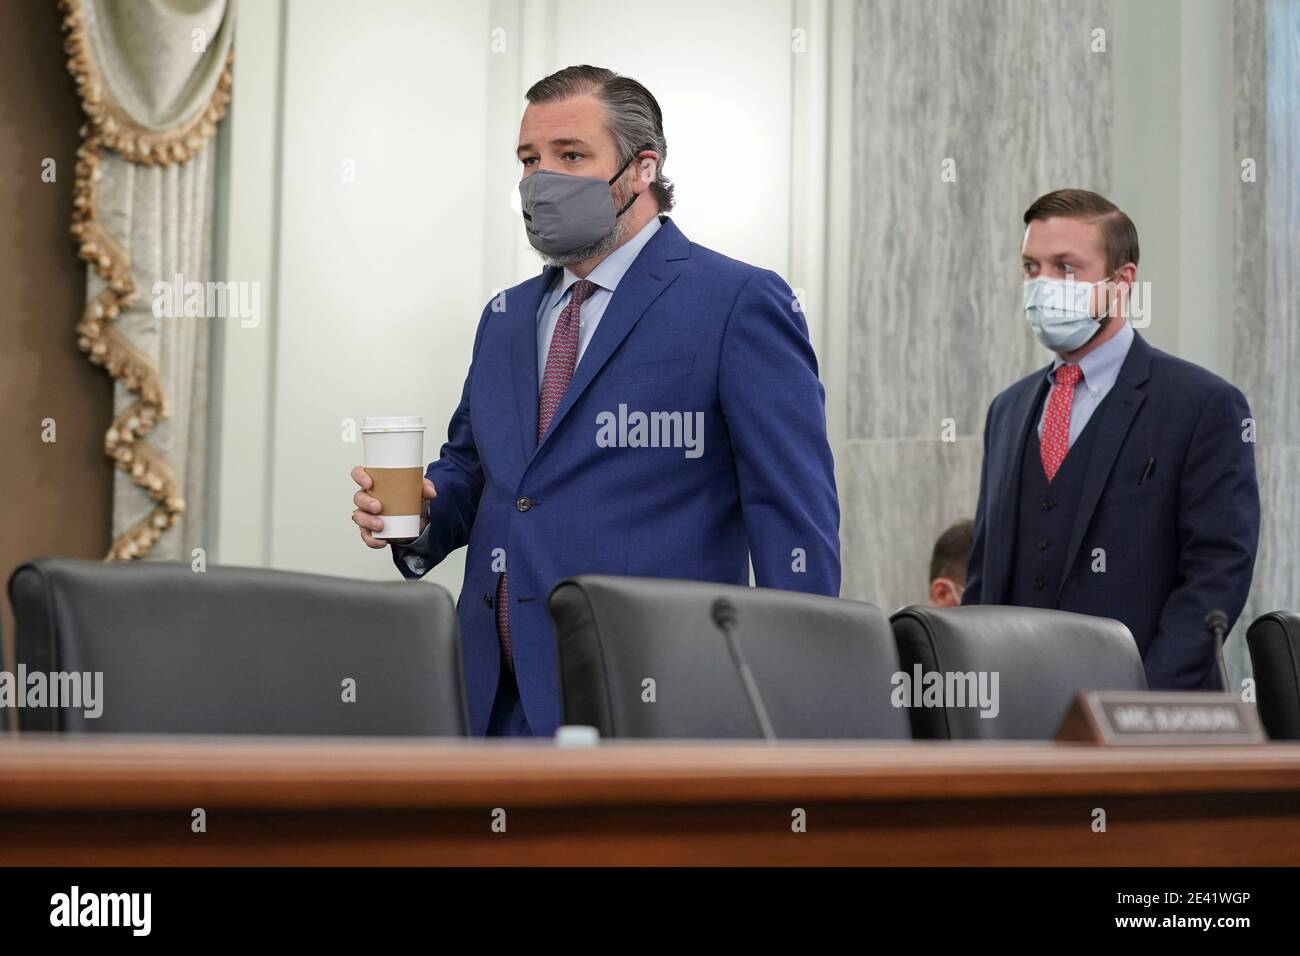 United States Senator Ted Cruz (Republican of Texas), wears a protective mask while arriving to a Senate Commerce, Science and Transportation Committee confirmation hearing for U.S. Secretary of Transportation nominee Pete Buttigieg in Washington, D.C., U.S., on Thursday, Jan. 21, 2021. Buttigieg, is pledging to carry out the administration's ambitious agenda to rebuild the nation's infrastructure, calling it a 'generational opportunity' to create new jobs, fight economic inequality and stem climate change. Credit: Stefani Reynolds / Pool via CNP | usage worldwide Stock Photo